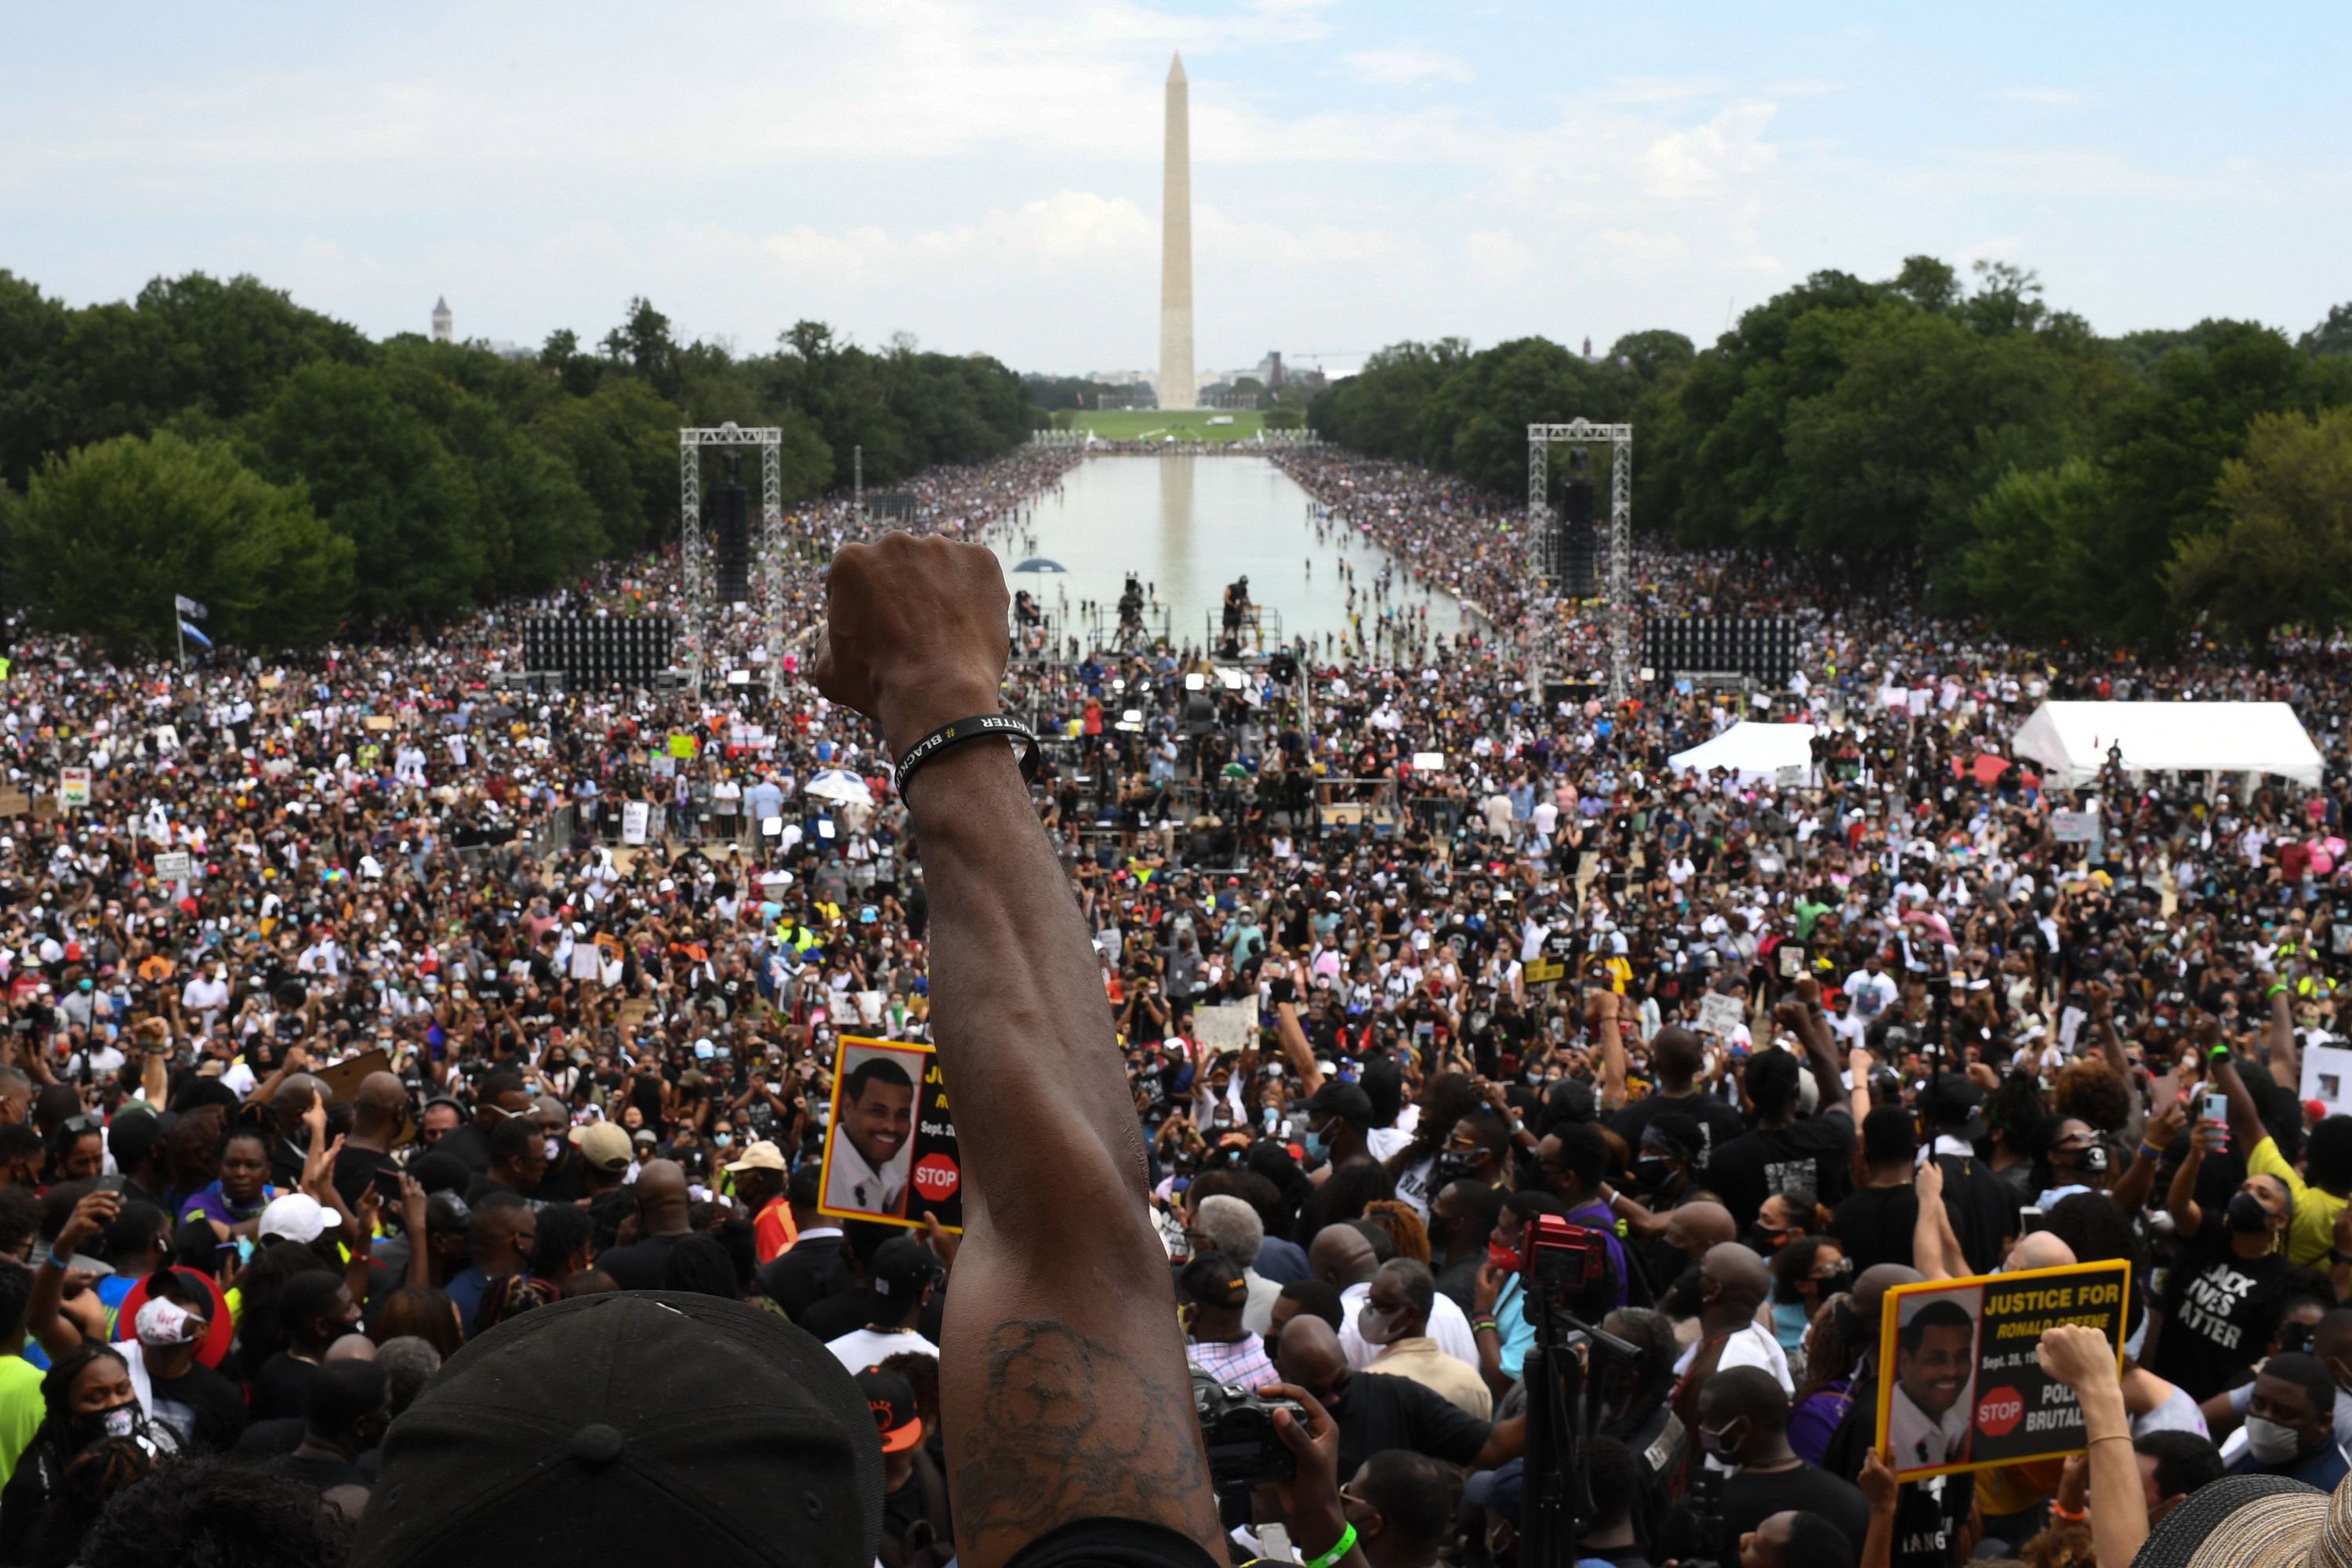 Civil rights leaders announce new March on Washington to demand voting rights reform | CNN